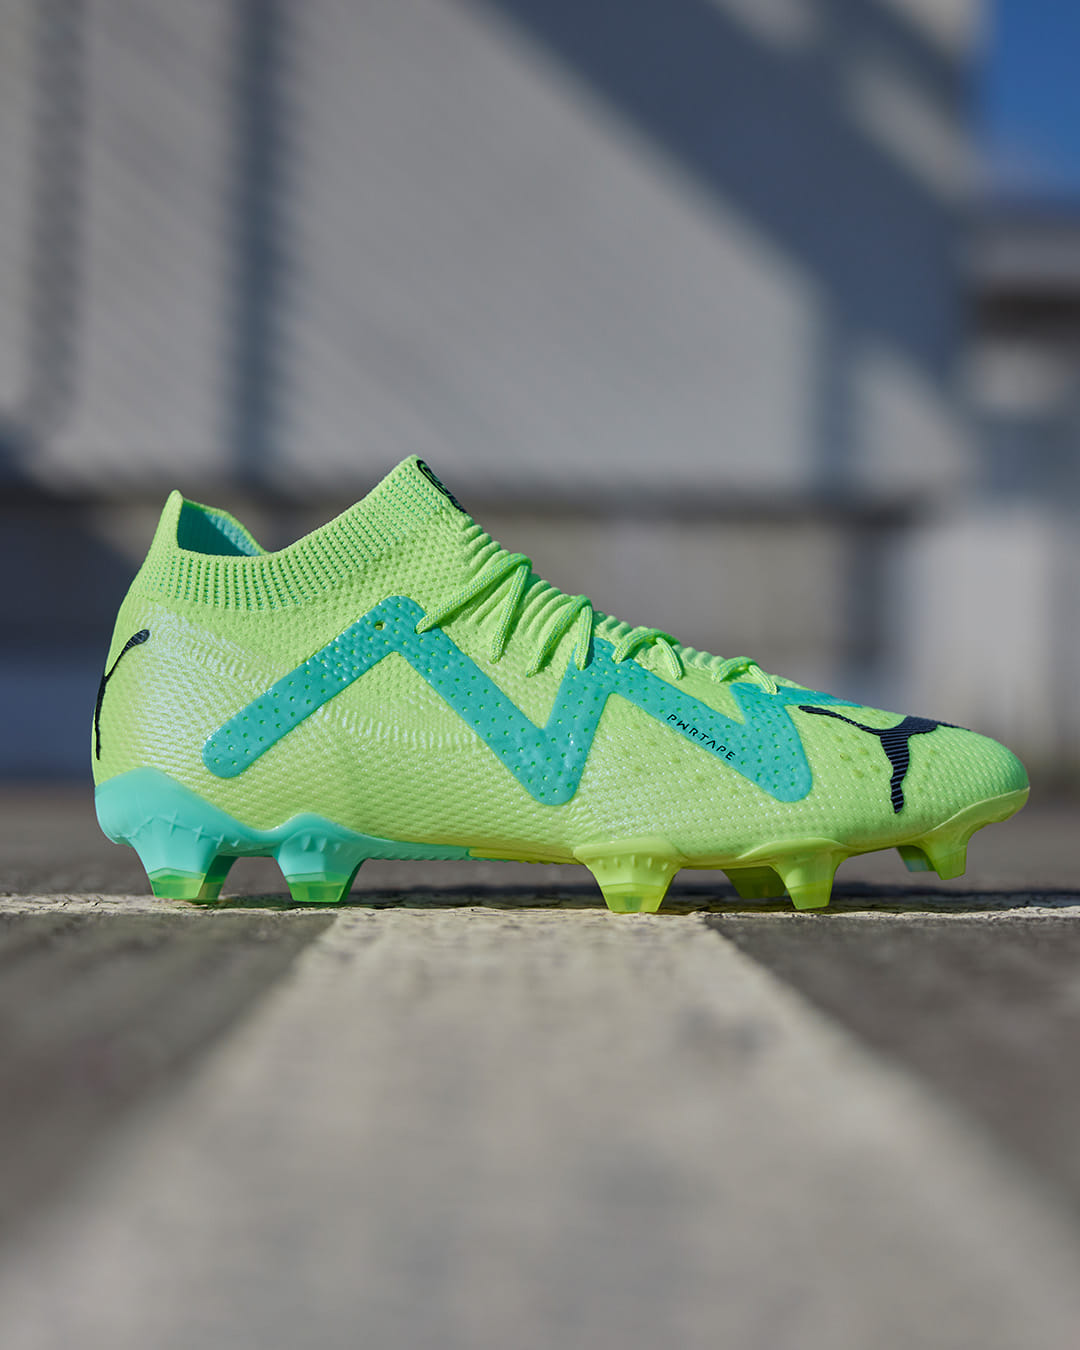 Por nombre Dolor Masculinidad Puma 'Pursuit' 2023 Boots Pack Released - Last of 22-23 Season, Shown off  By Injured Neymar Who Will Never Wear Them - Footy Headlines